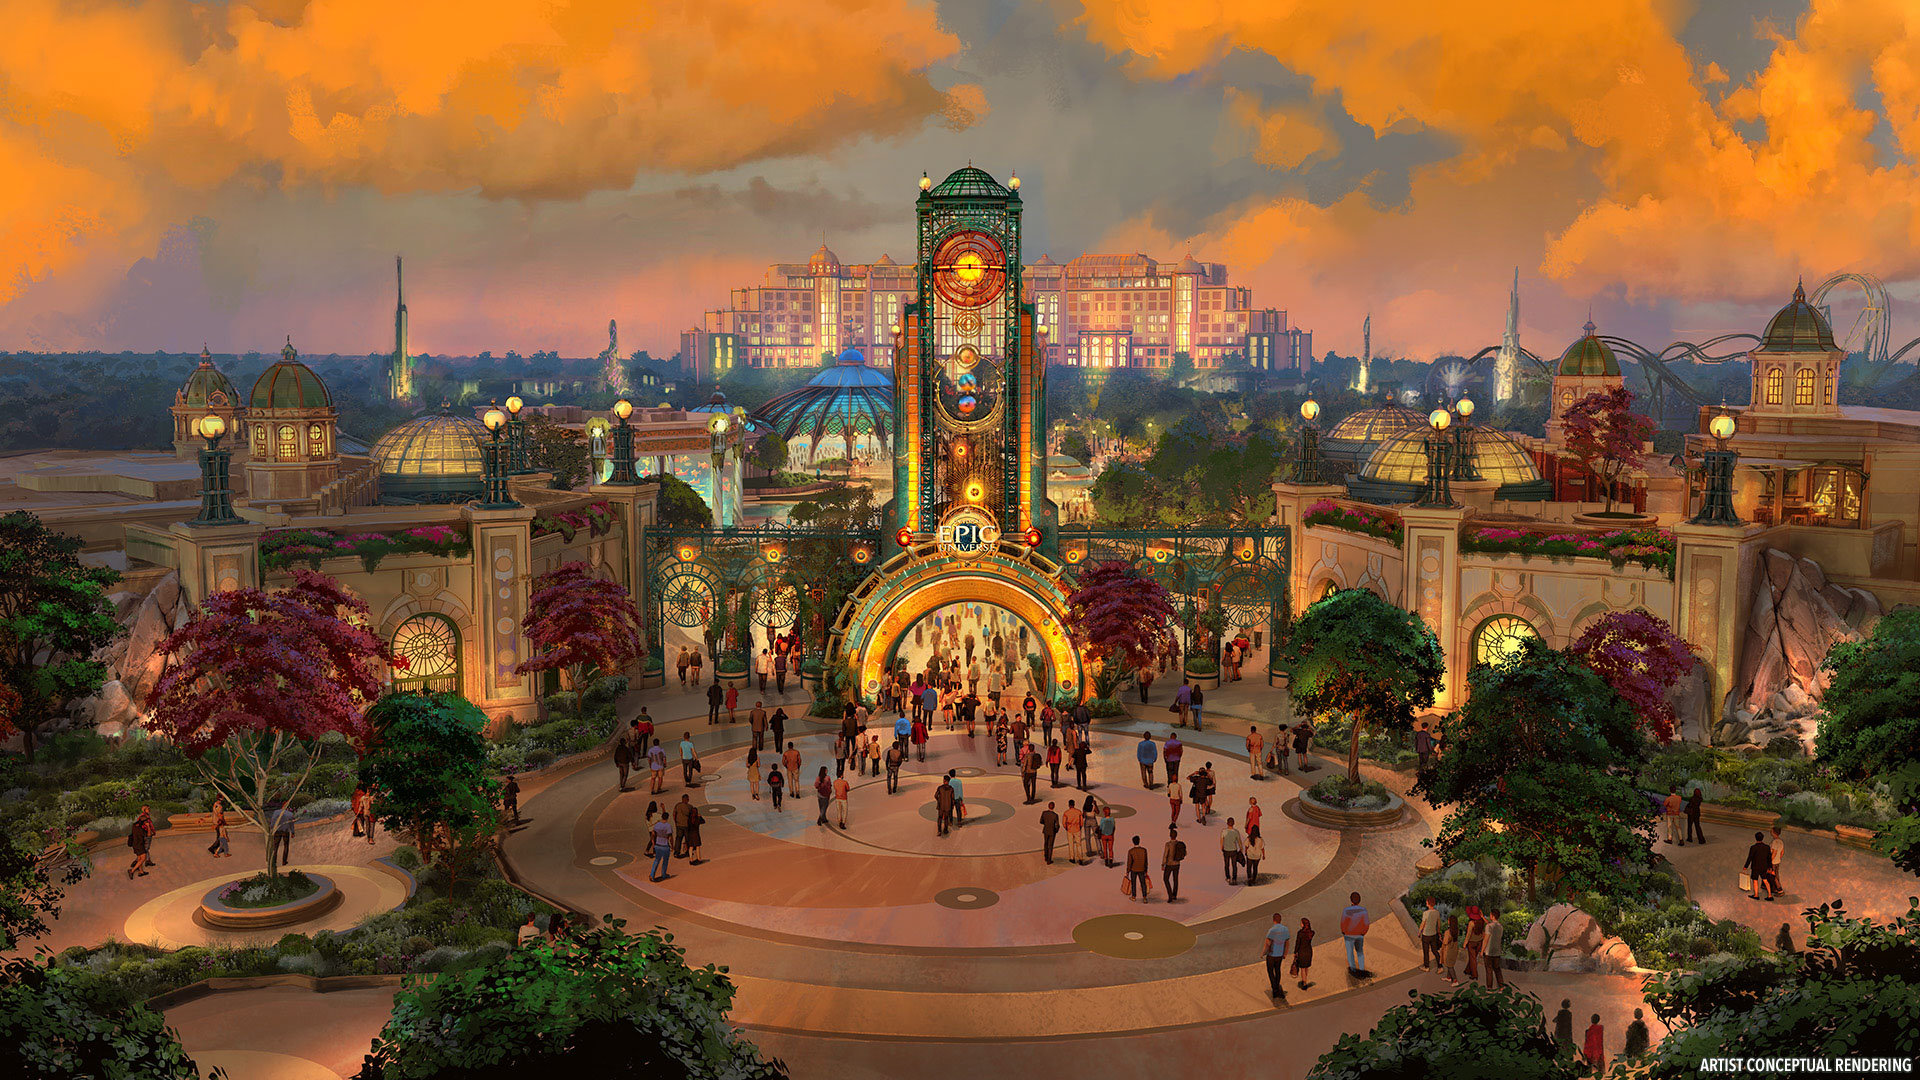 concept entrance to epic universe with main portal lit up in warm colors